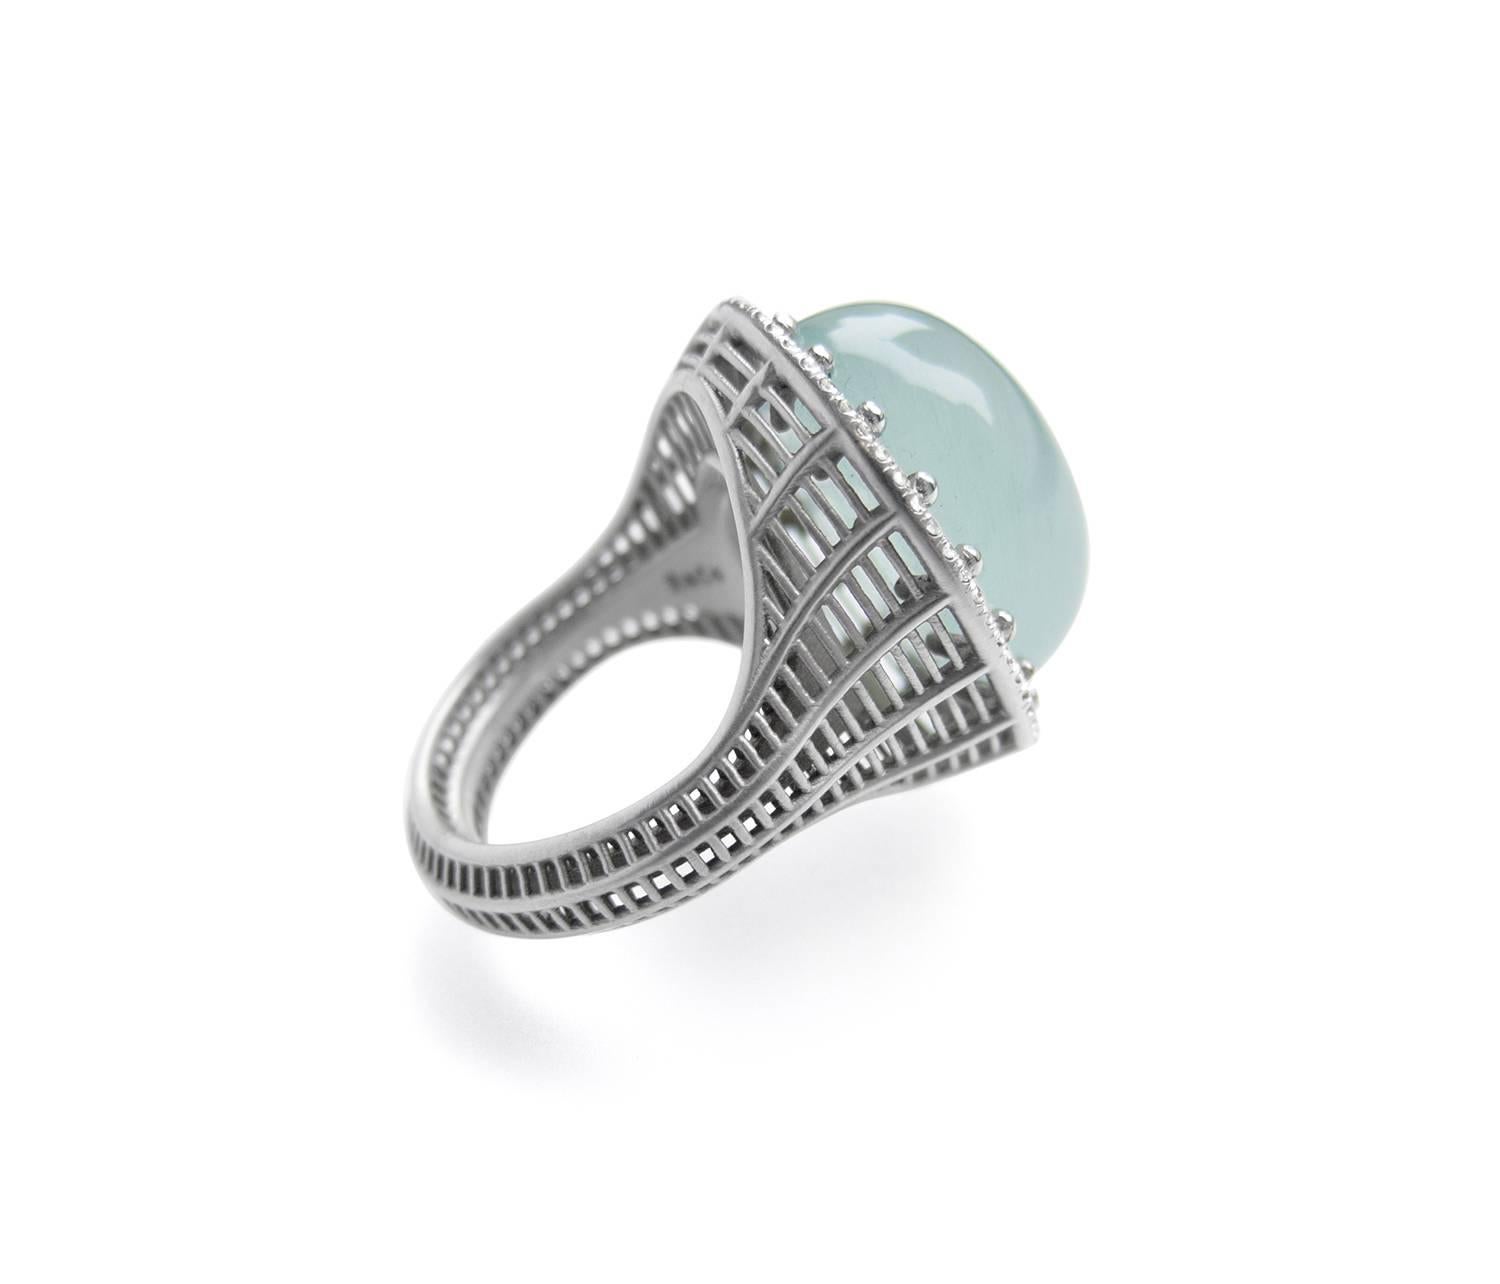 From the Wired Collection, a cocktail ring in 18k white gold with a one-of-a-kind chatoyant aquamarine cabochon (25 cts) and white diamond pavé (0.32 cts). Signature wireform grid pattern with ball prong settings. Matte finish. Size 7.